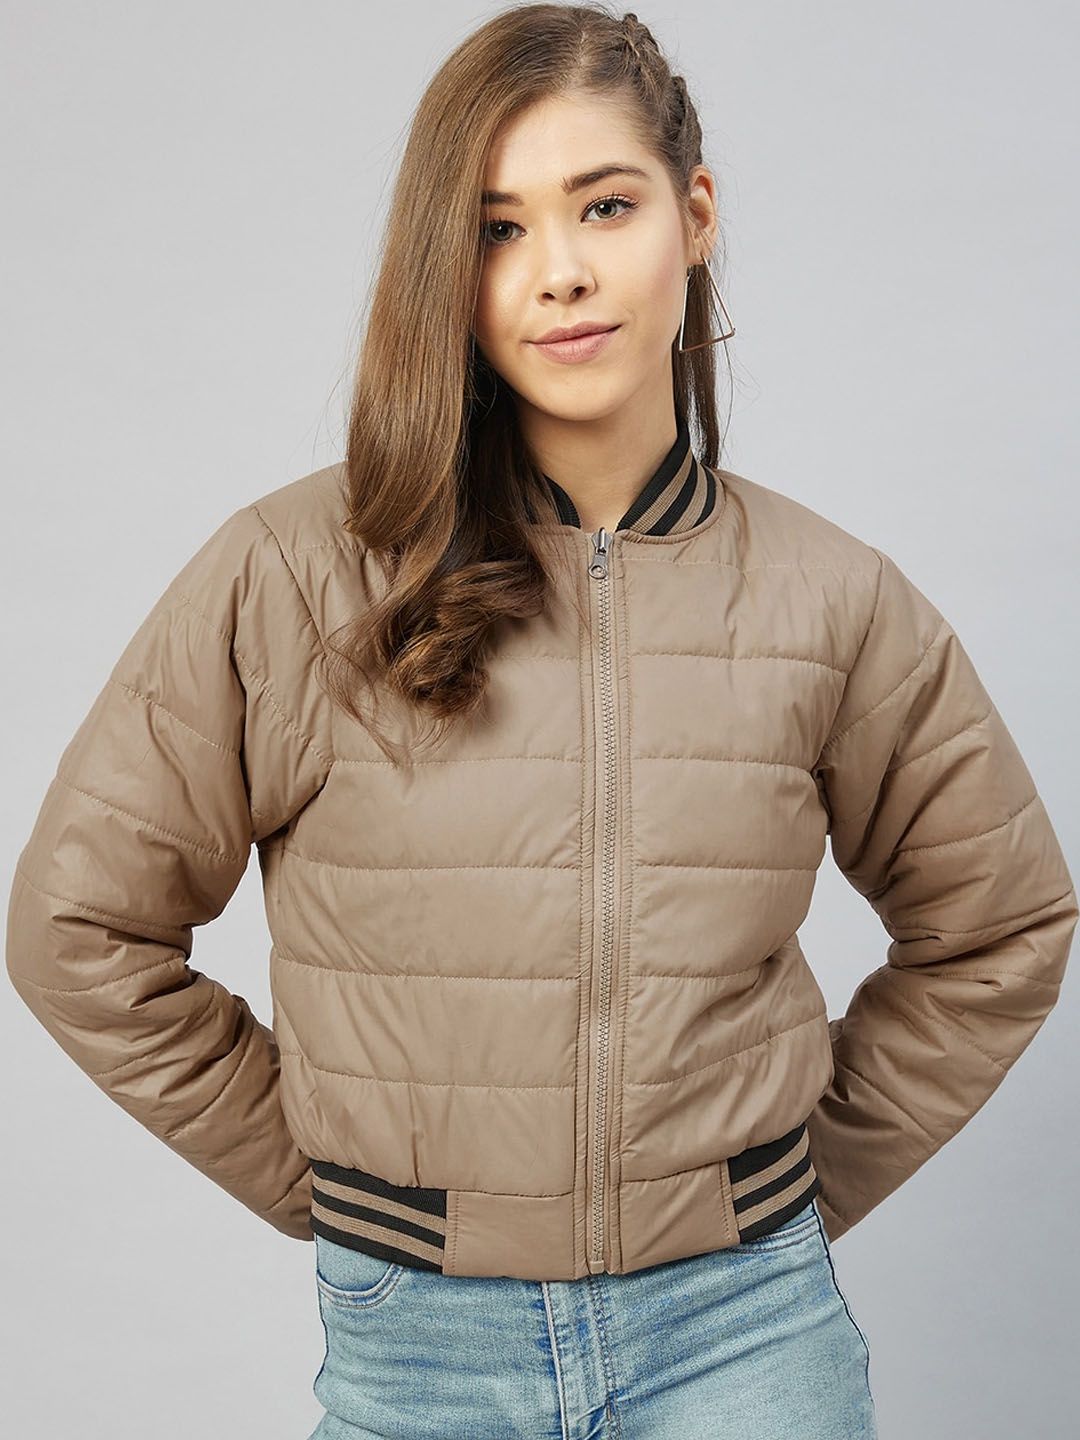 Marie Claire Women Khaki Puffer Jacket Price in India